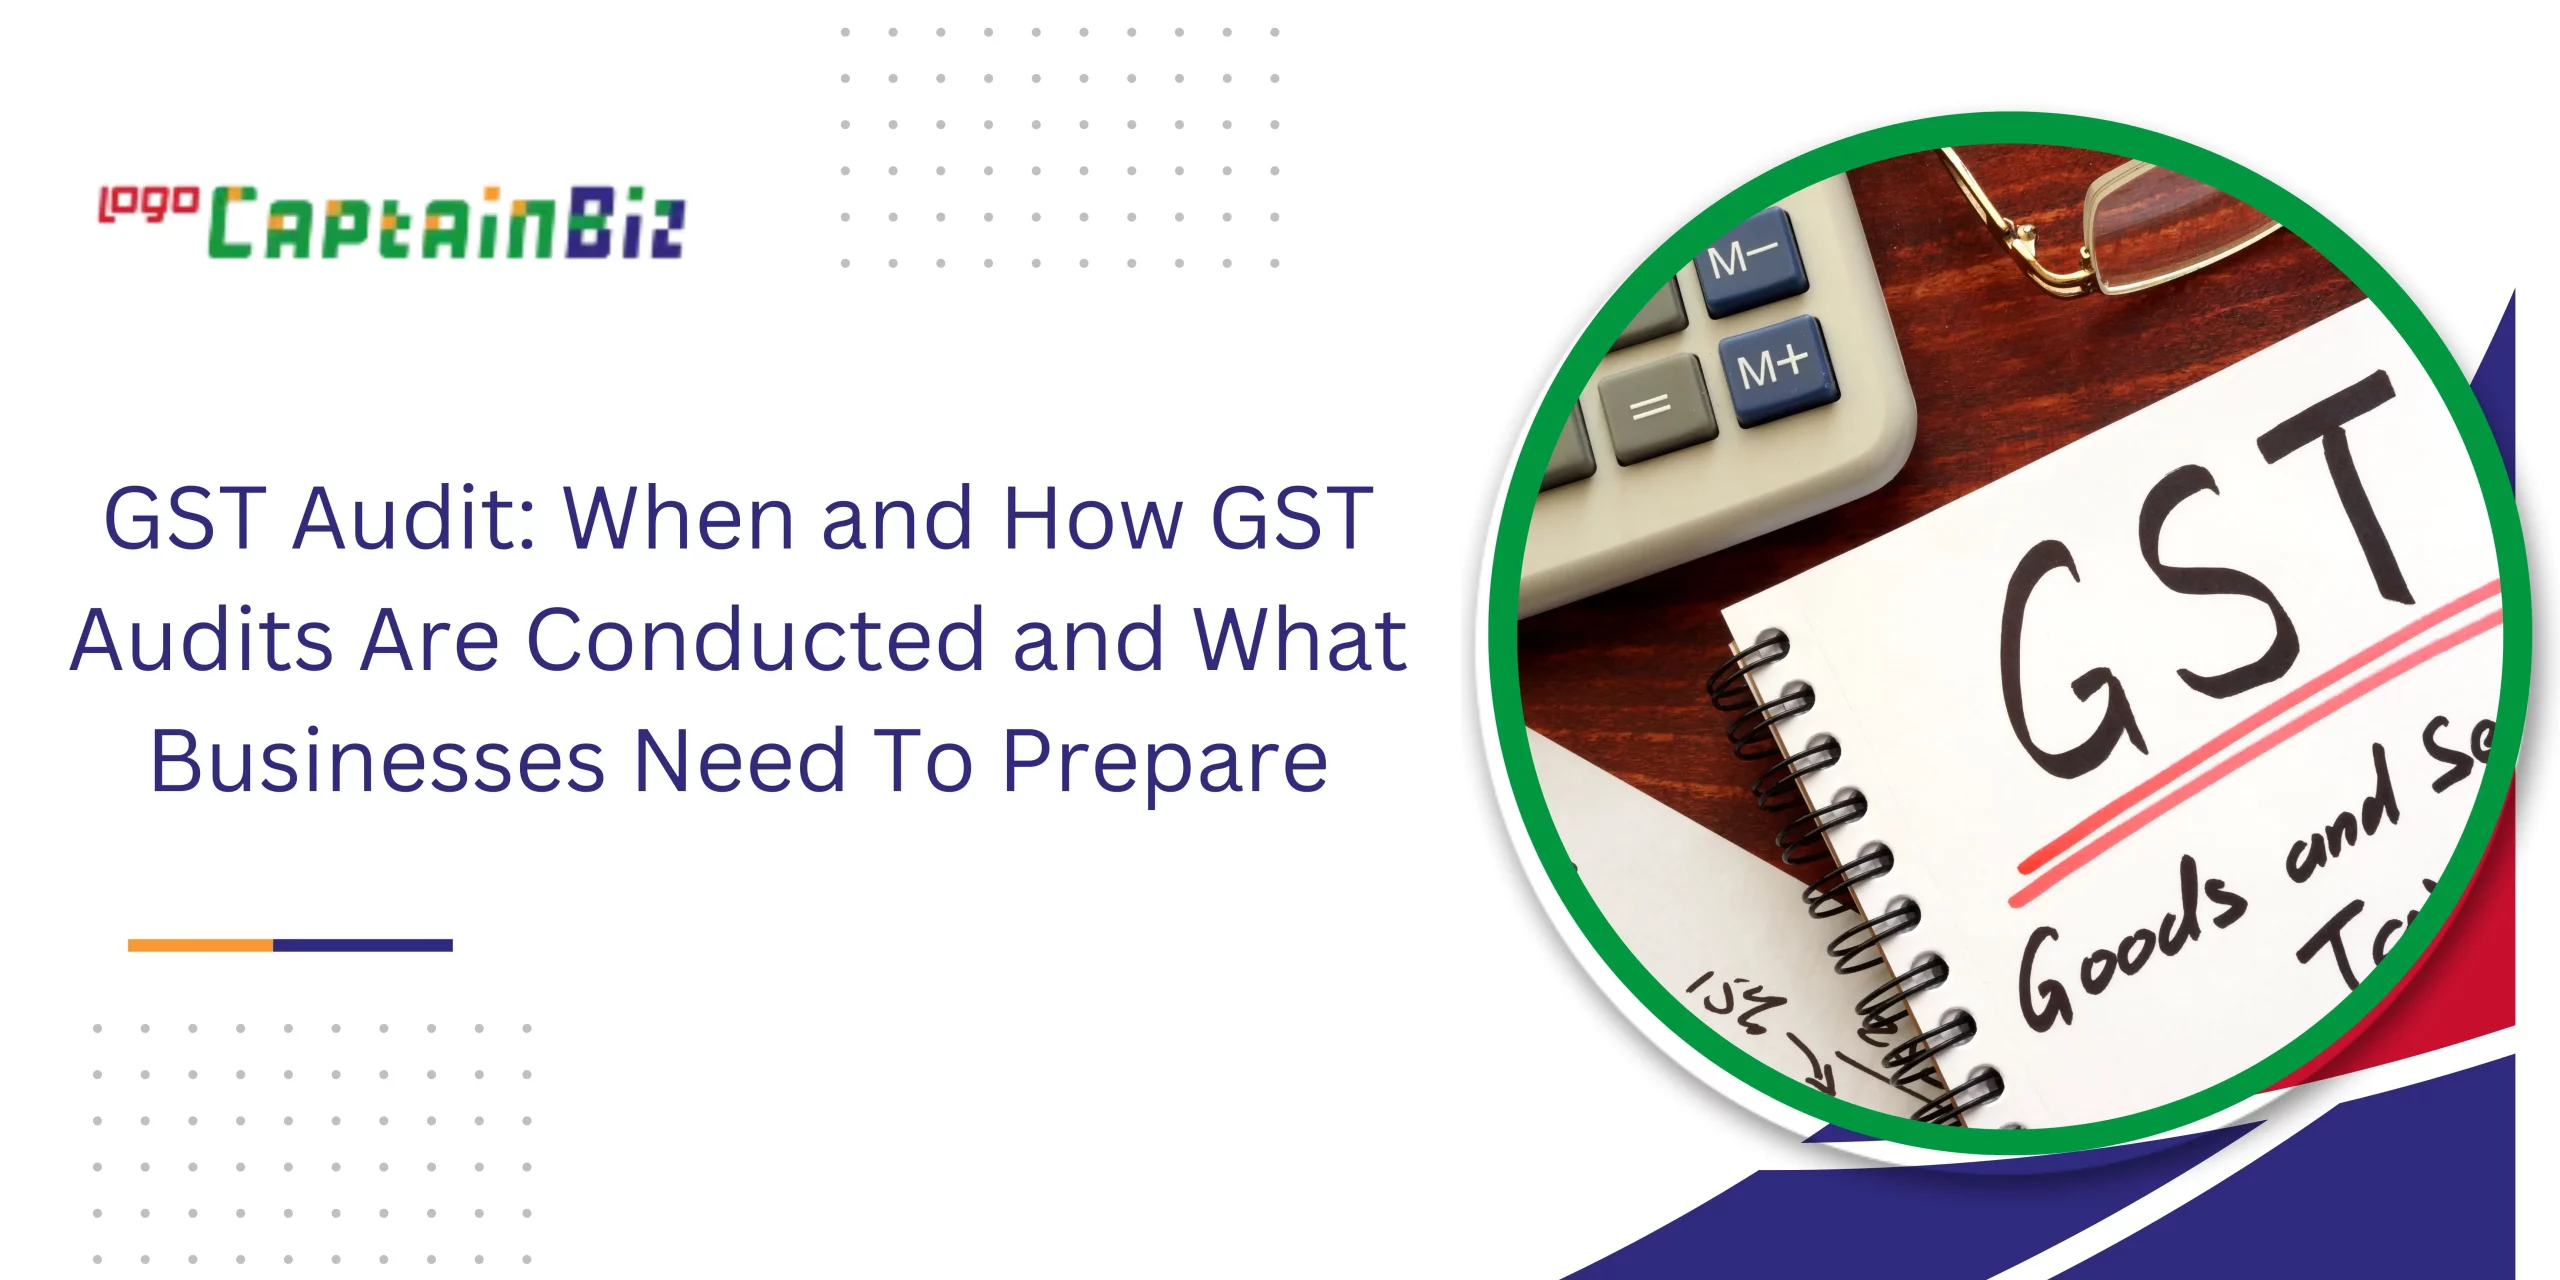 captainbiz gst audit when and how gst audits are conducted and what businesses need to prepare